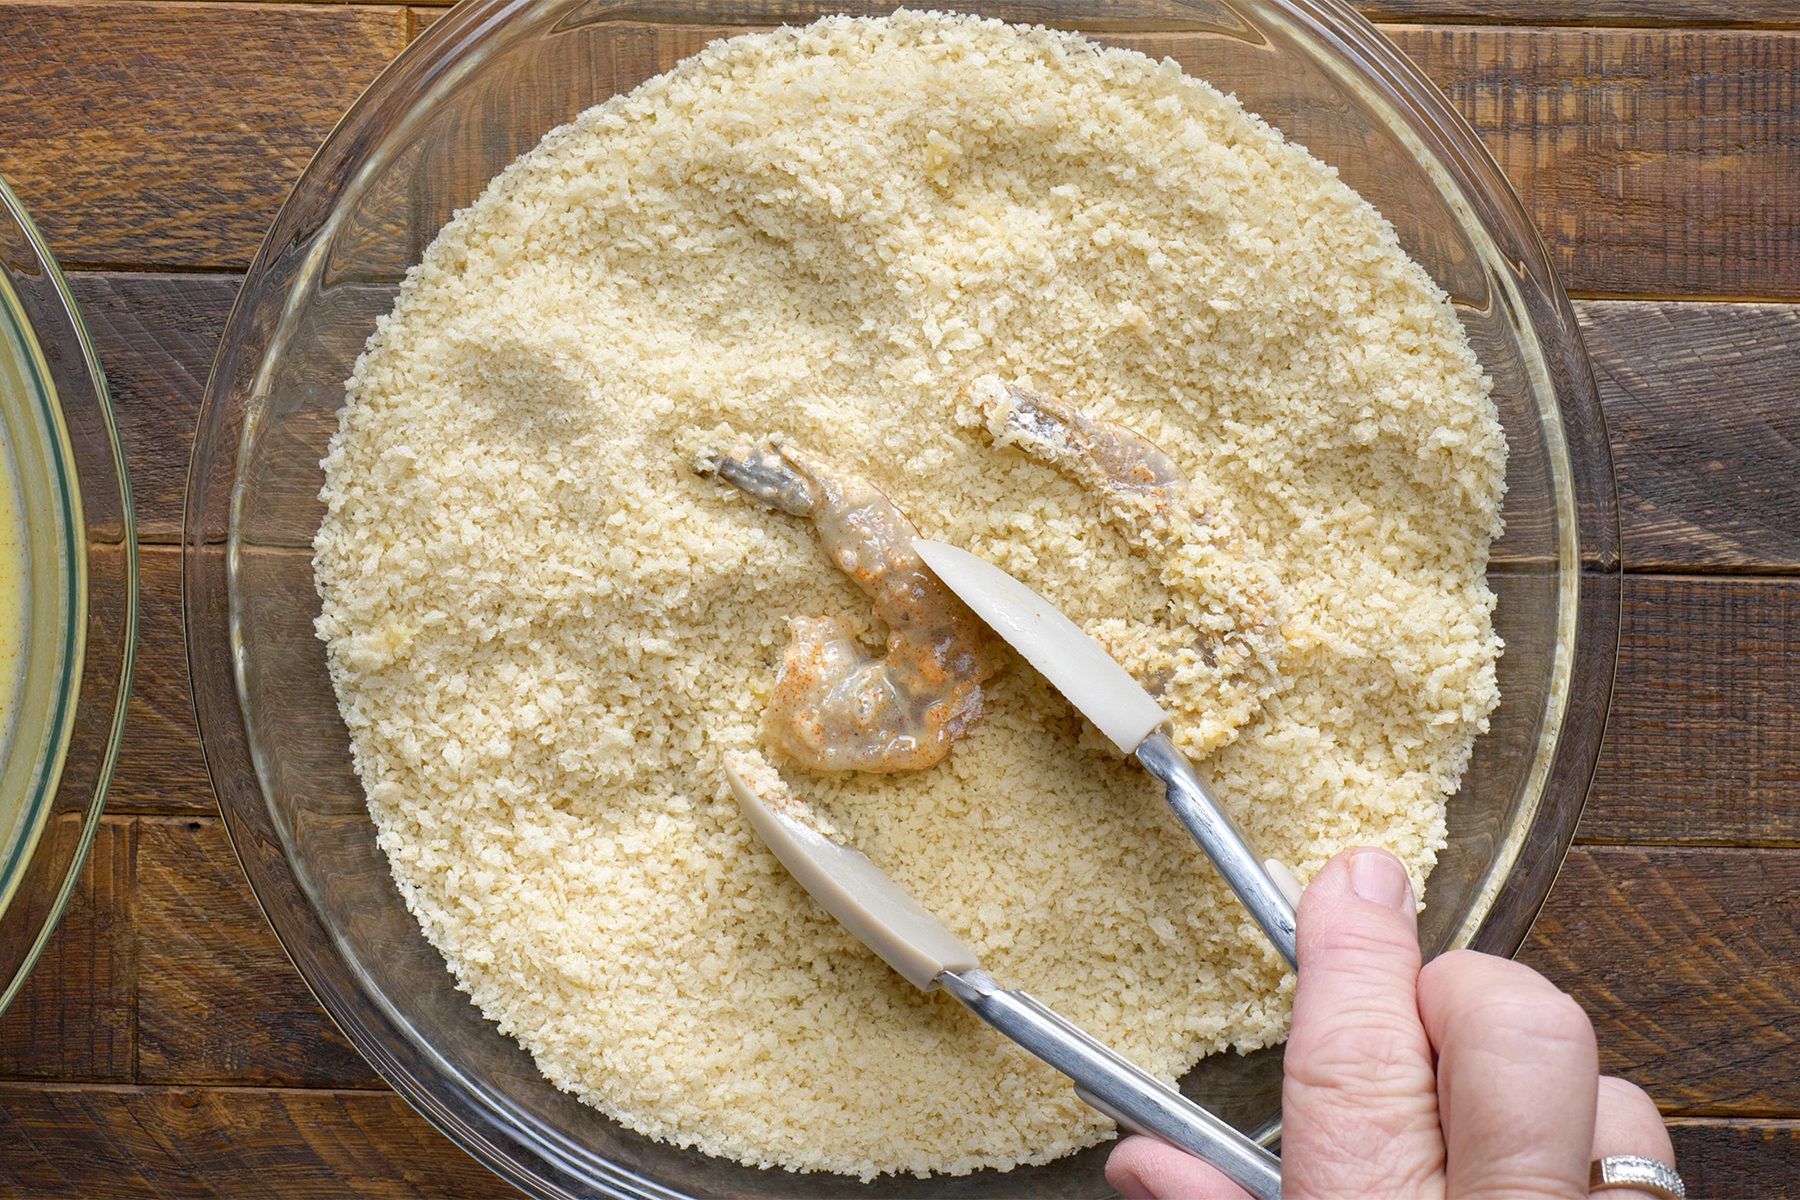 A person coating shrimp in bread crumbs